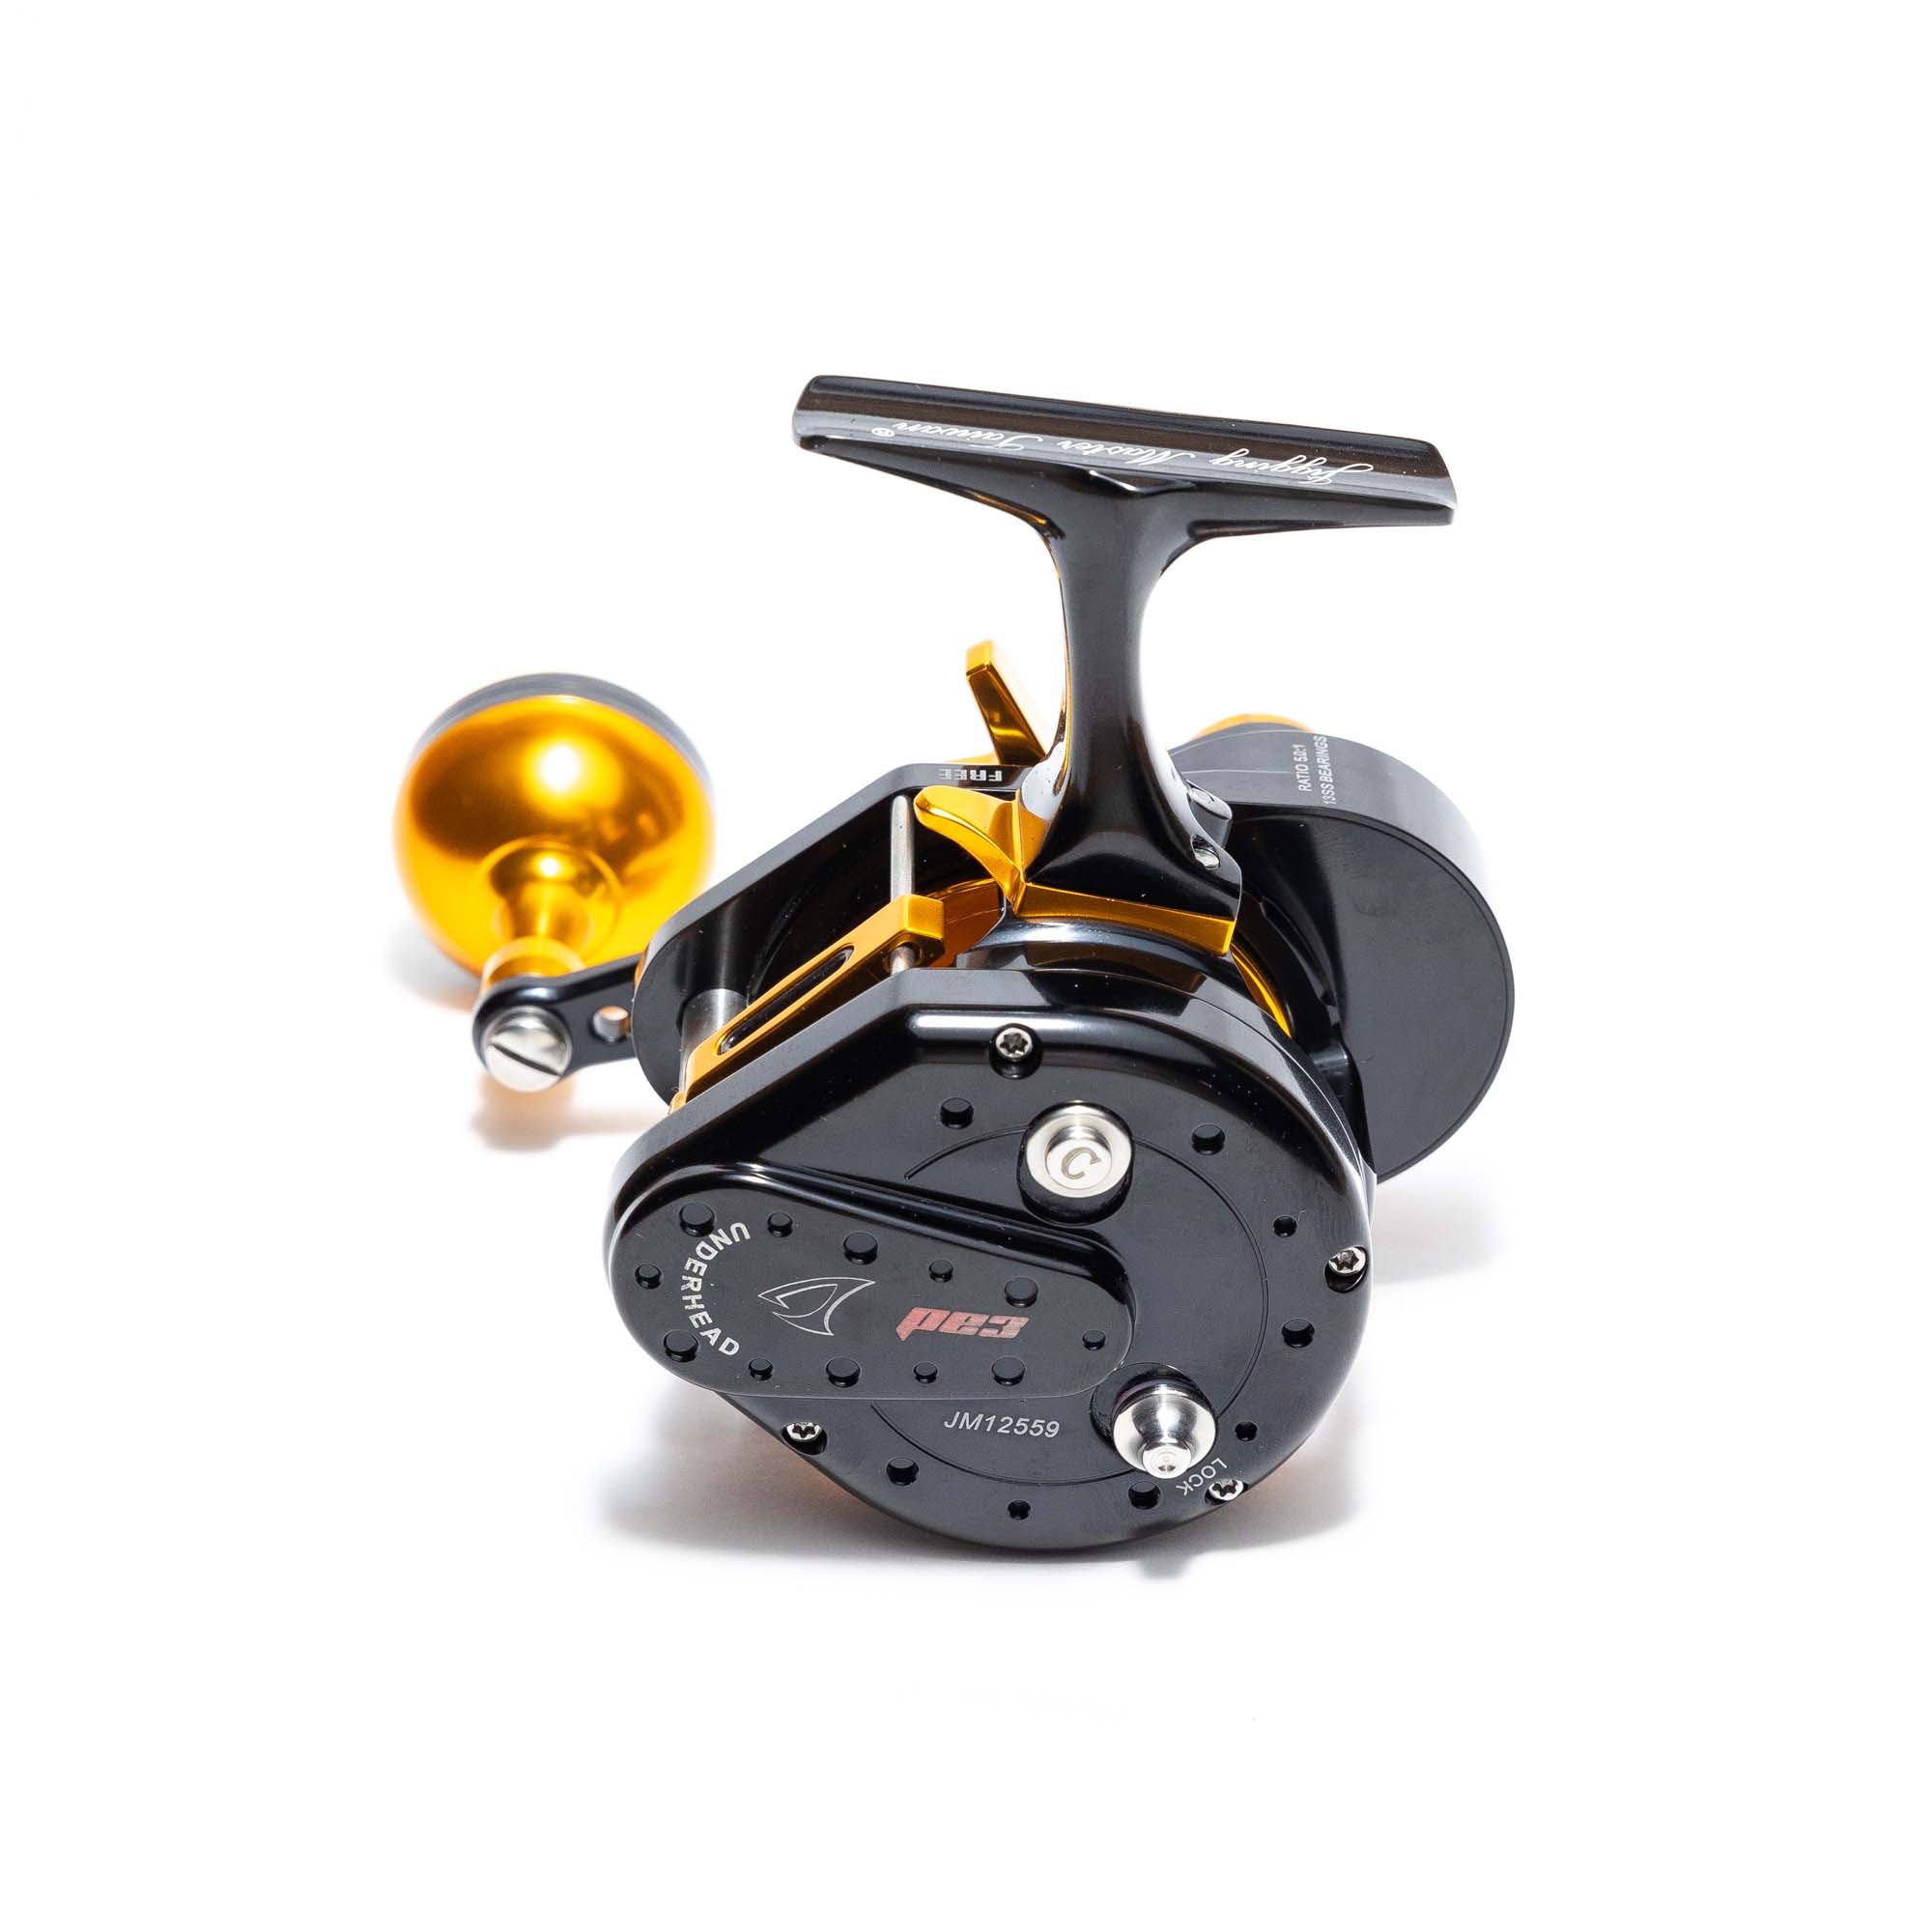 Jigging Master Underhead PE3 Right Handed - Compleat Angler